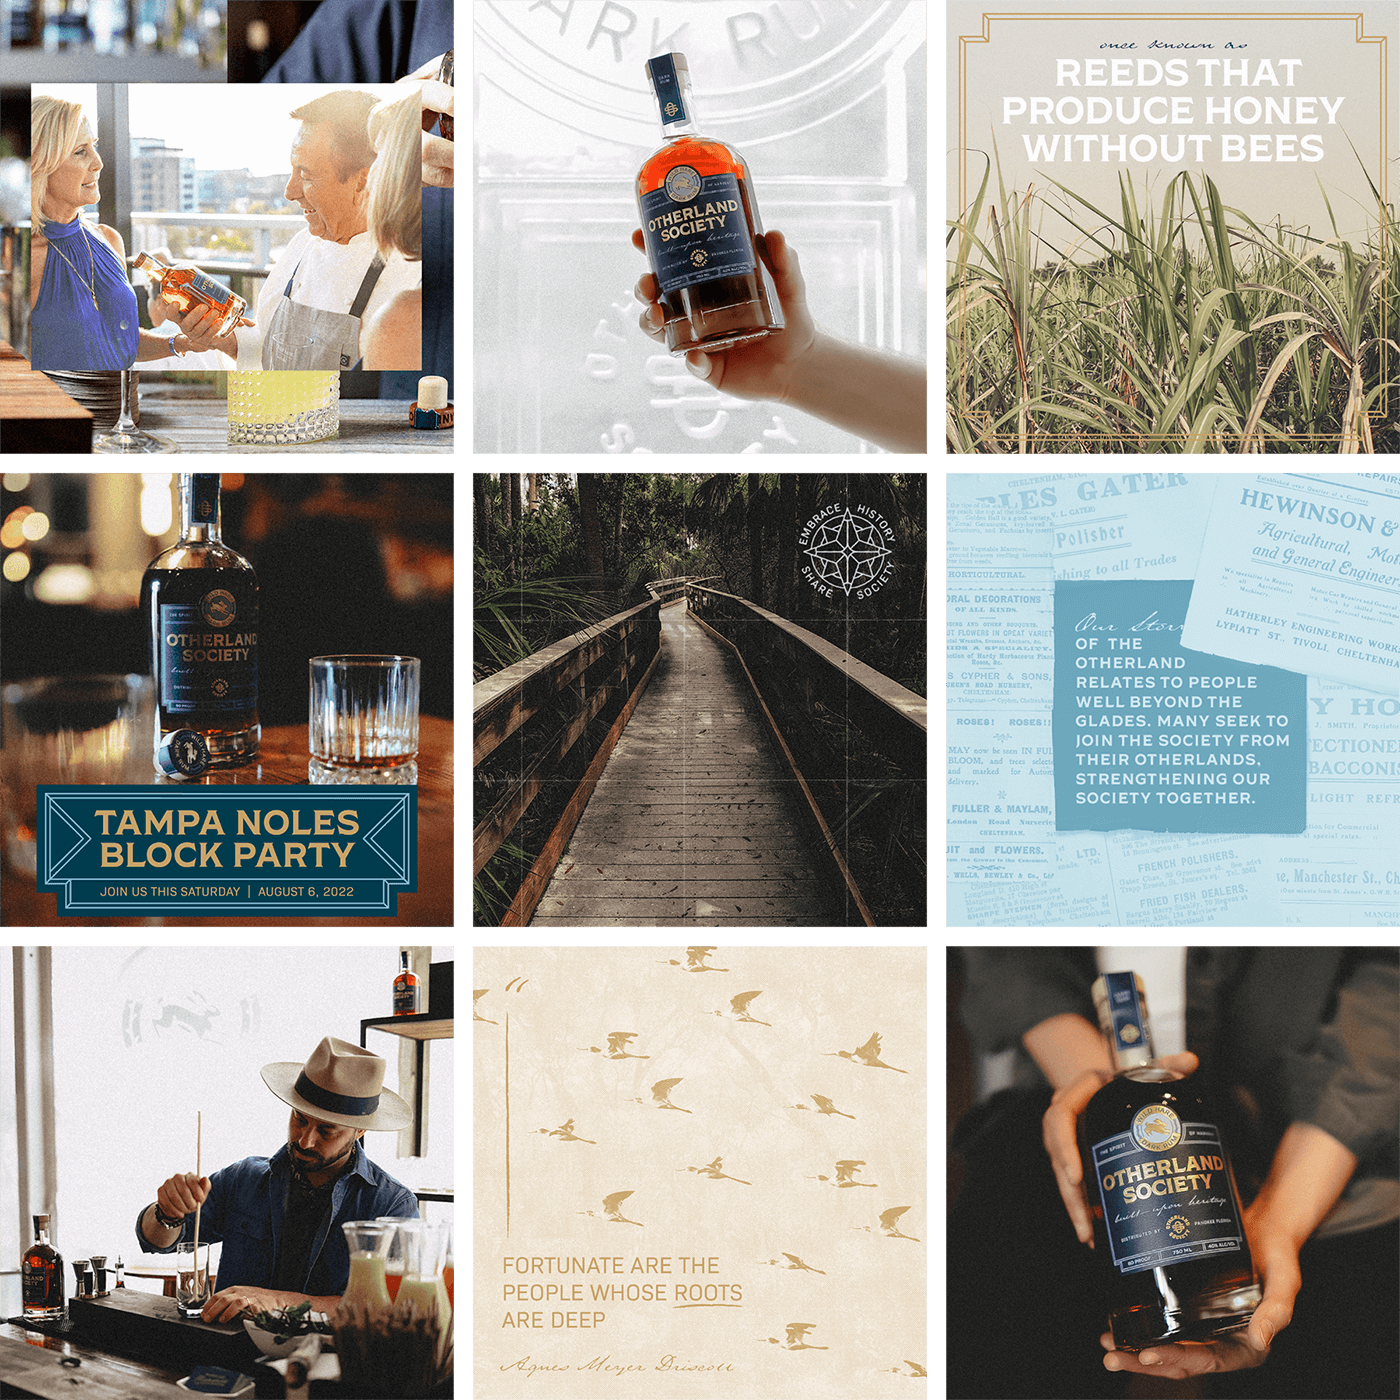 9 image grid showing a variety of social media graphics varying with product shots, branded graphics, and lifestyle images